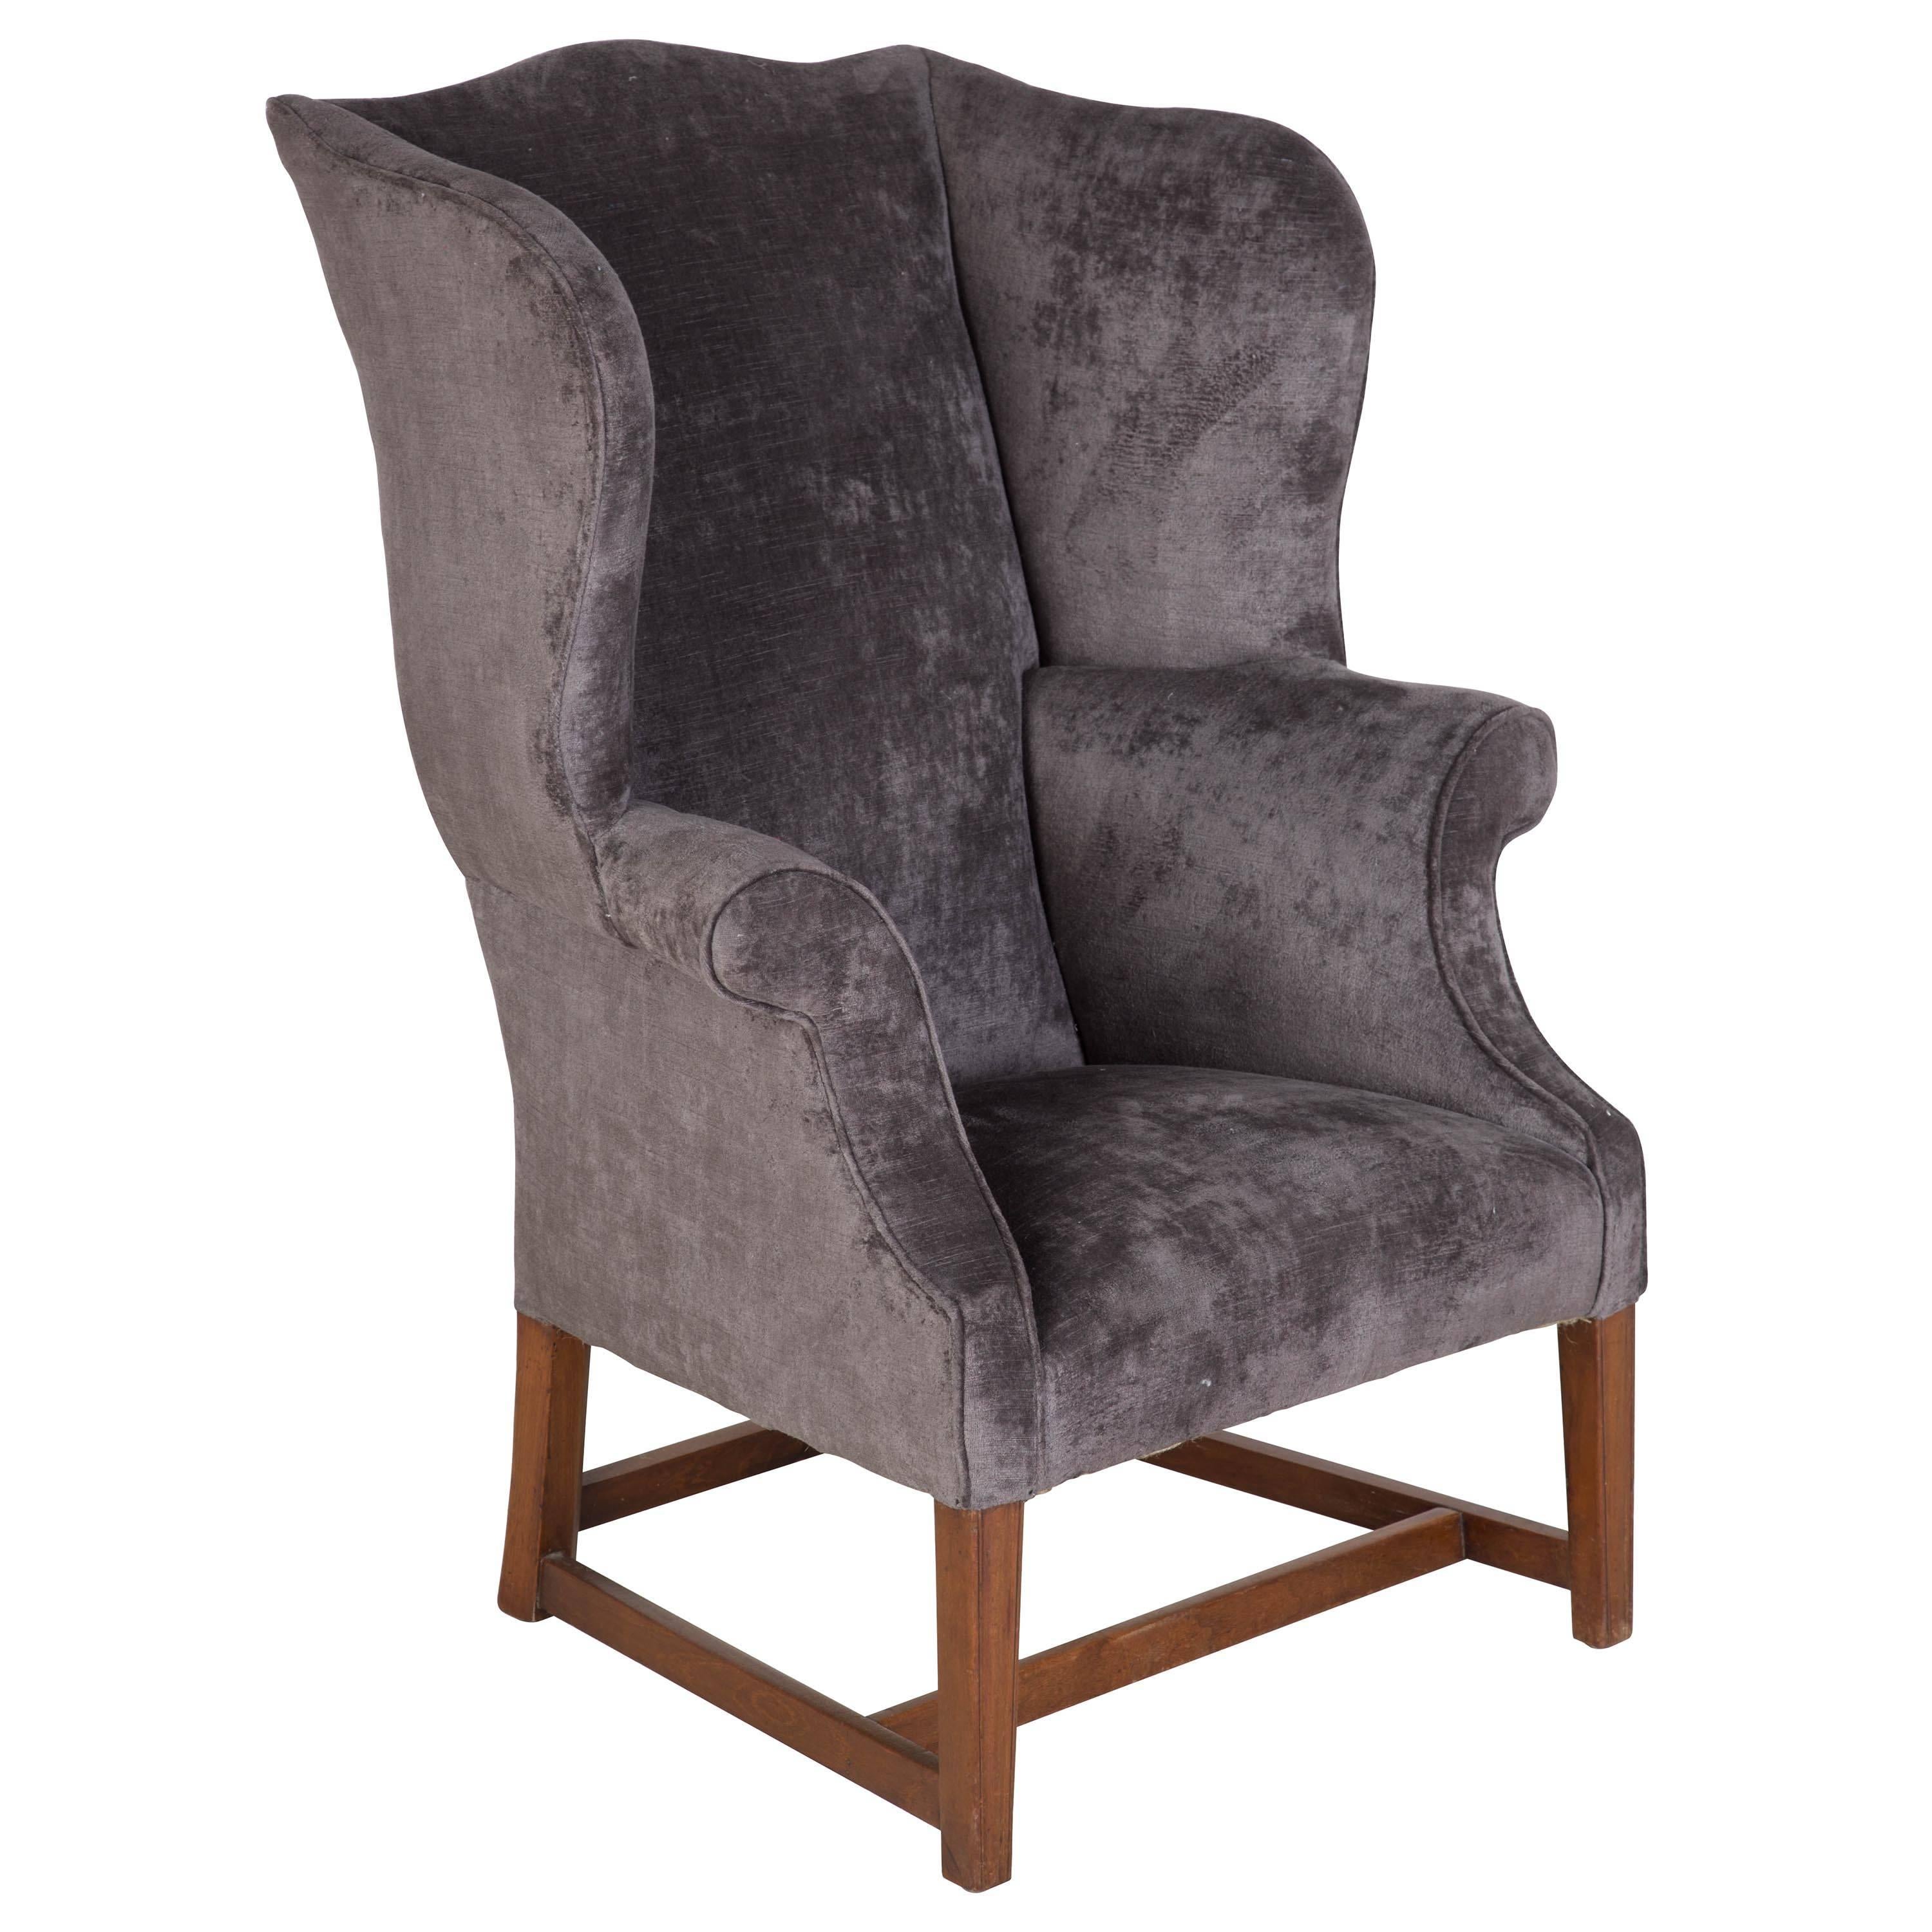 A well proportioned mid-19th century English wing armchair recovered in velvet. Seat height: 40cm.